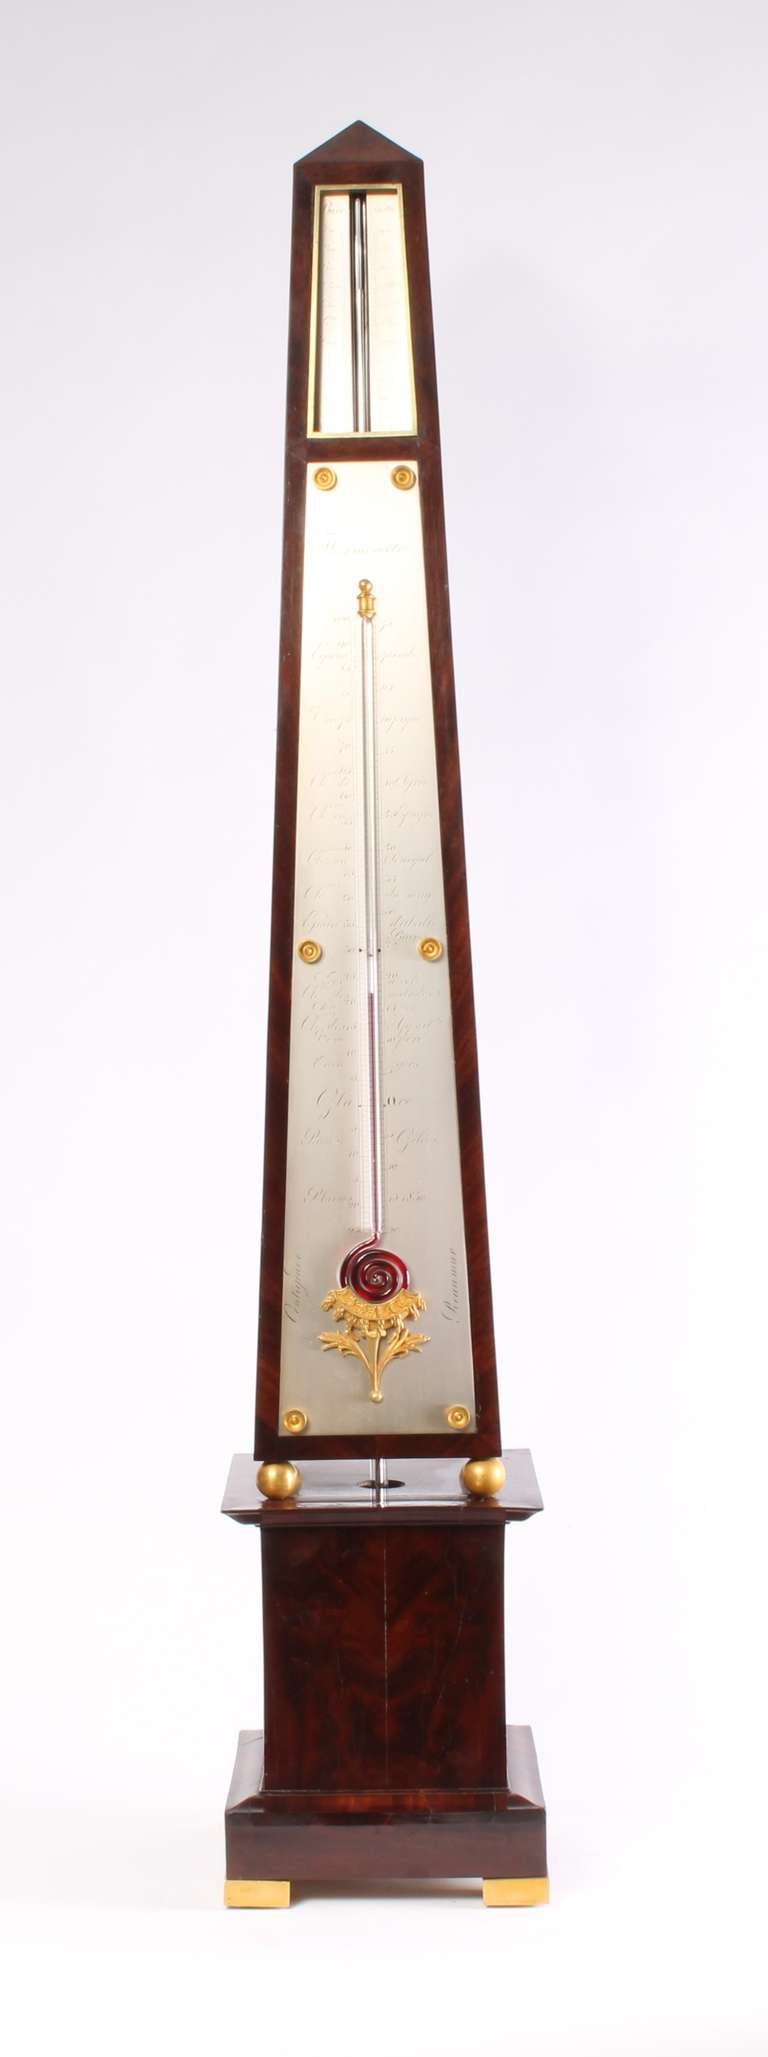 The flame mahogany-veneered pine case consists of two parts. The obelisk-shaped top has firegilt brass ball feet and is placed on a moulded base with firegilt brass block feet. The silvered brass register plates of the barometer are let in flush